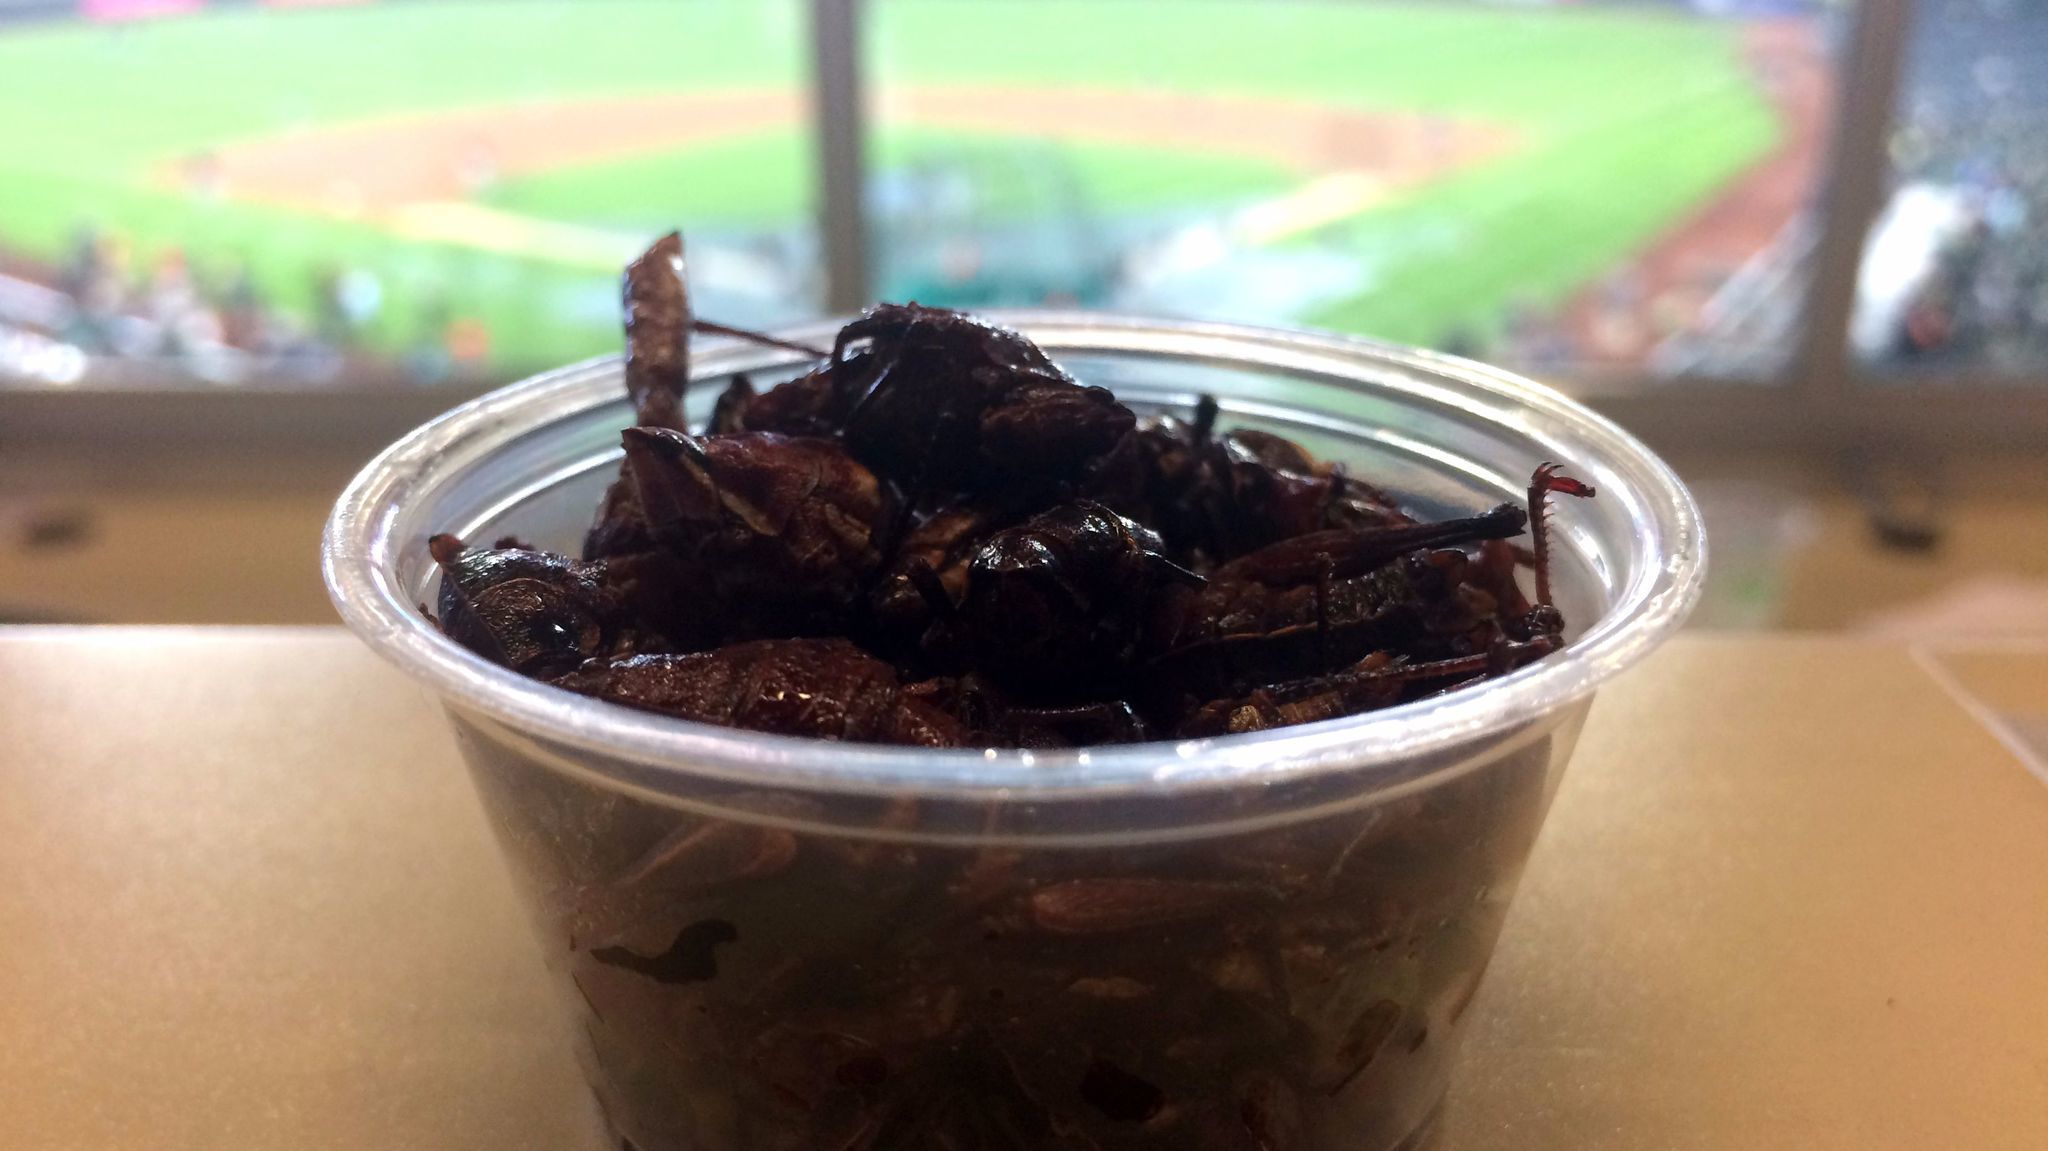 I ate Safeco Field’s grasshoppers and lived to write about ...